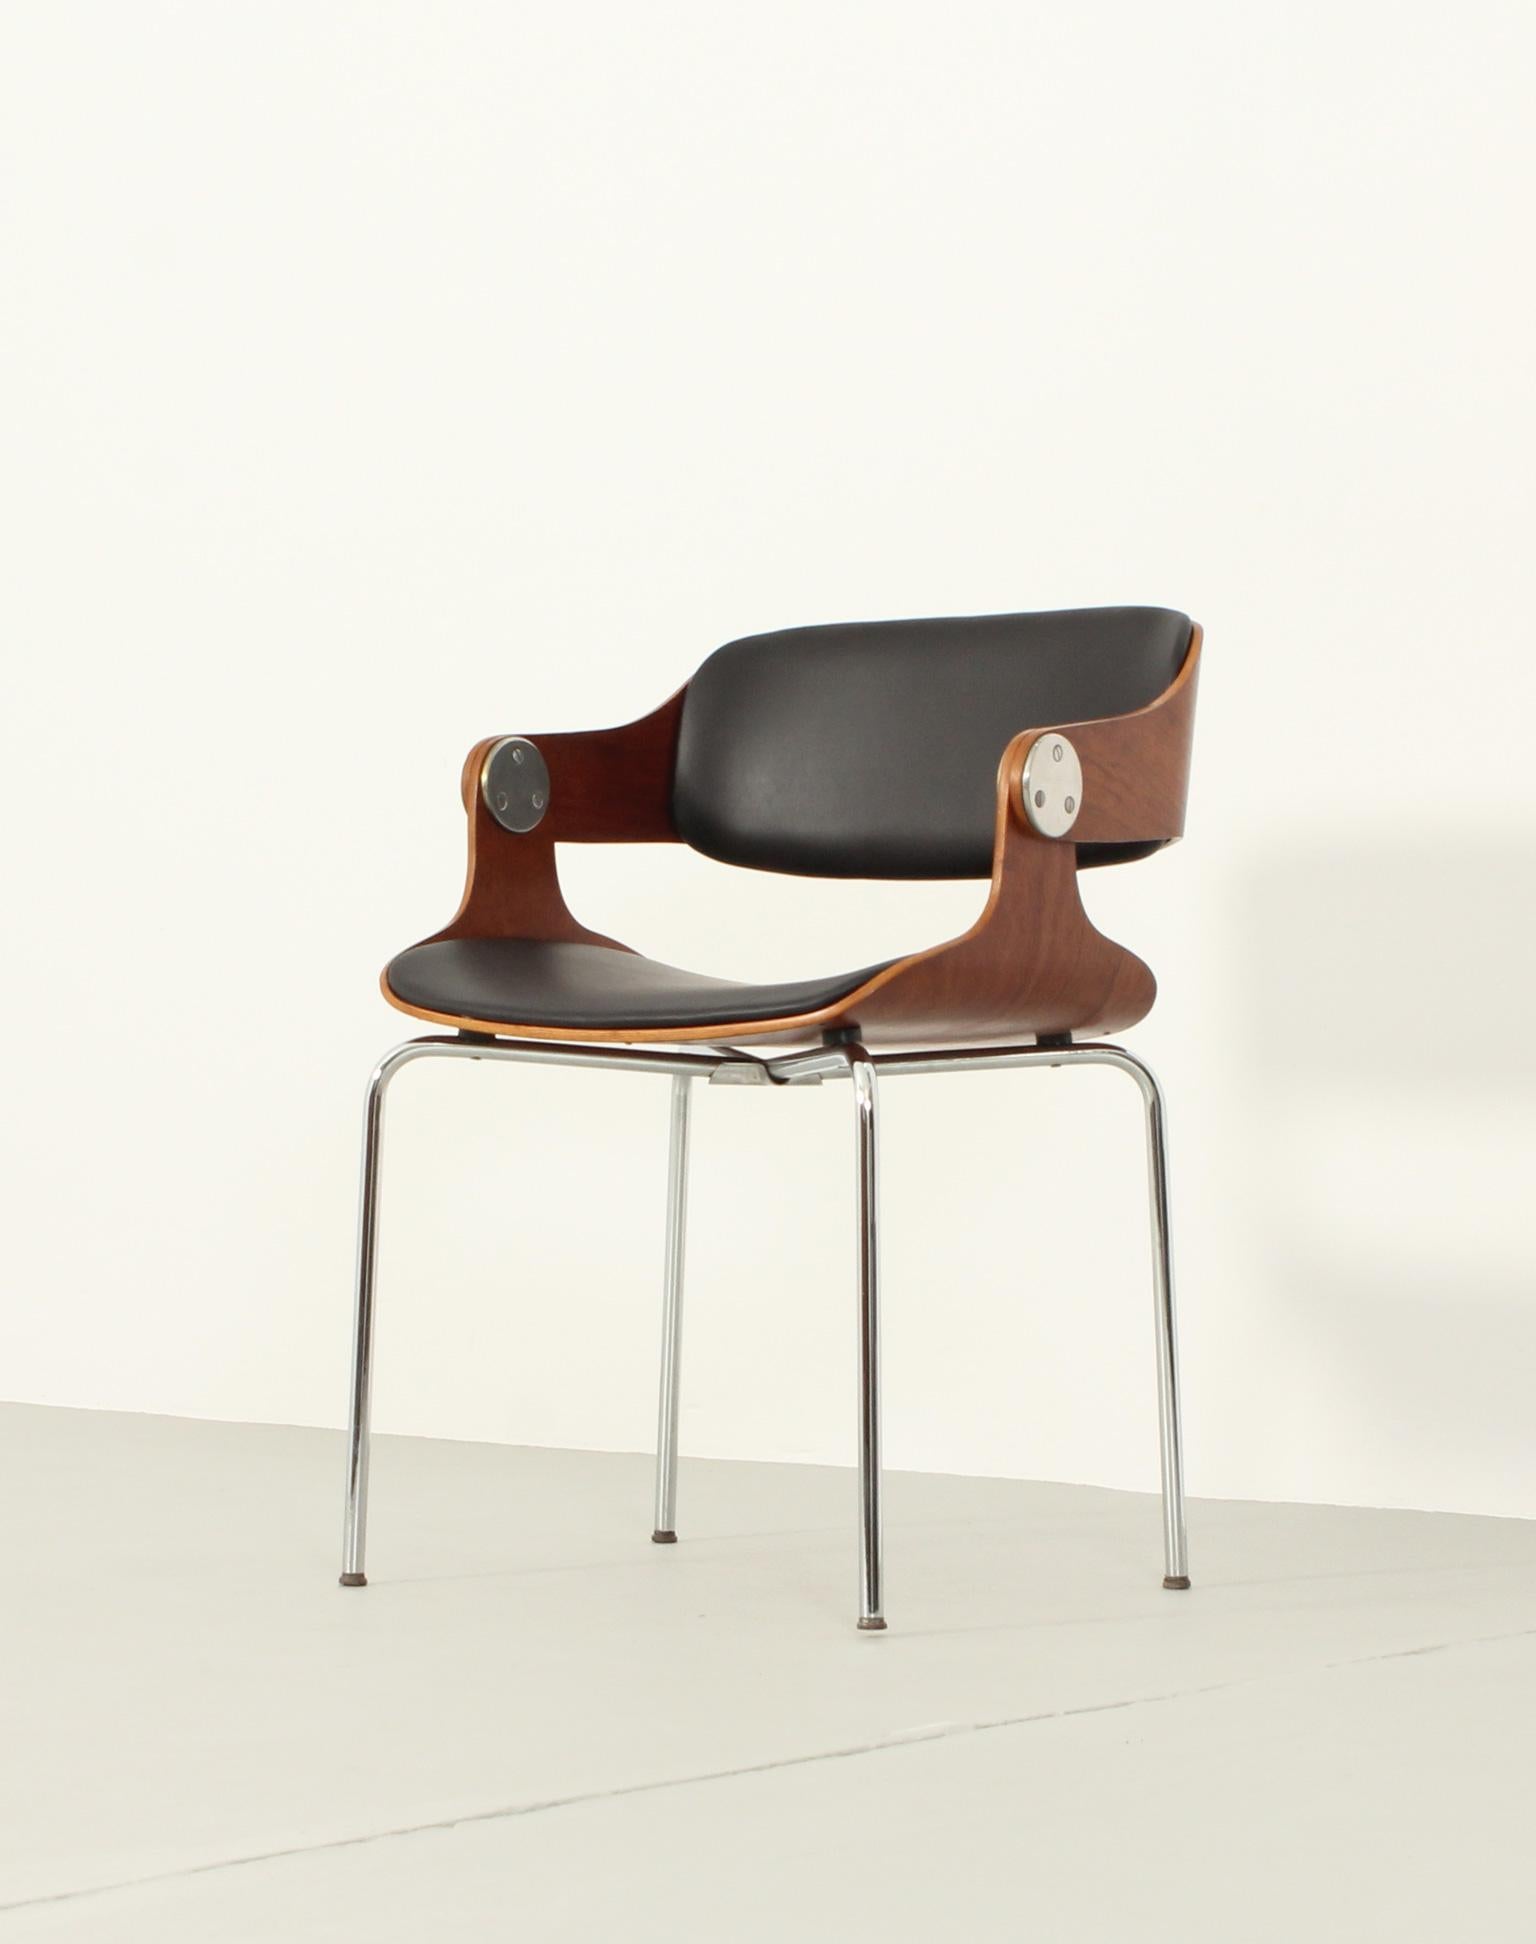 Dining or working chair designed in 1965 by german architect Eugen Schmidt. Plywood seat and back, chromed metal base and new upholstery in black leather.